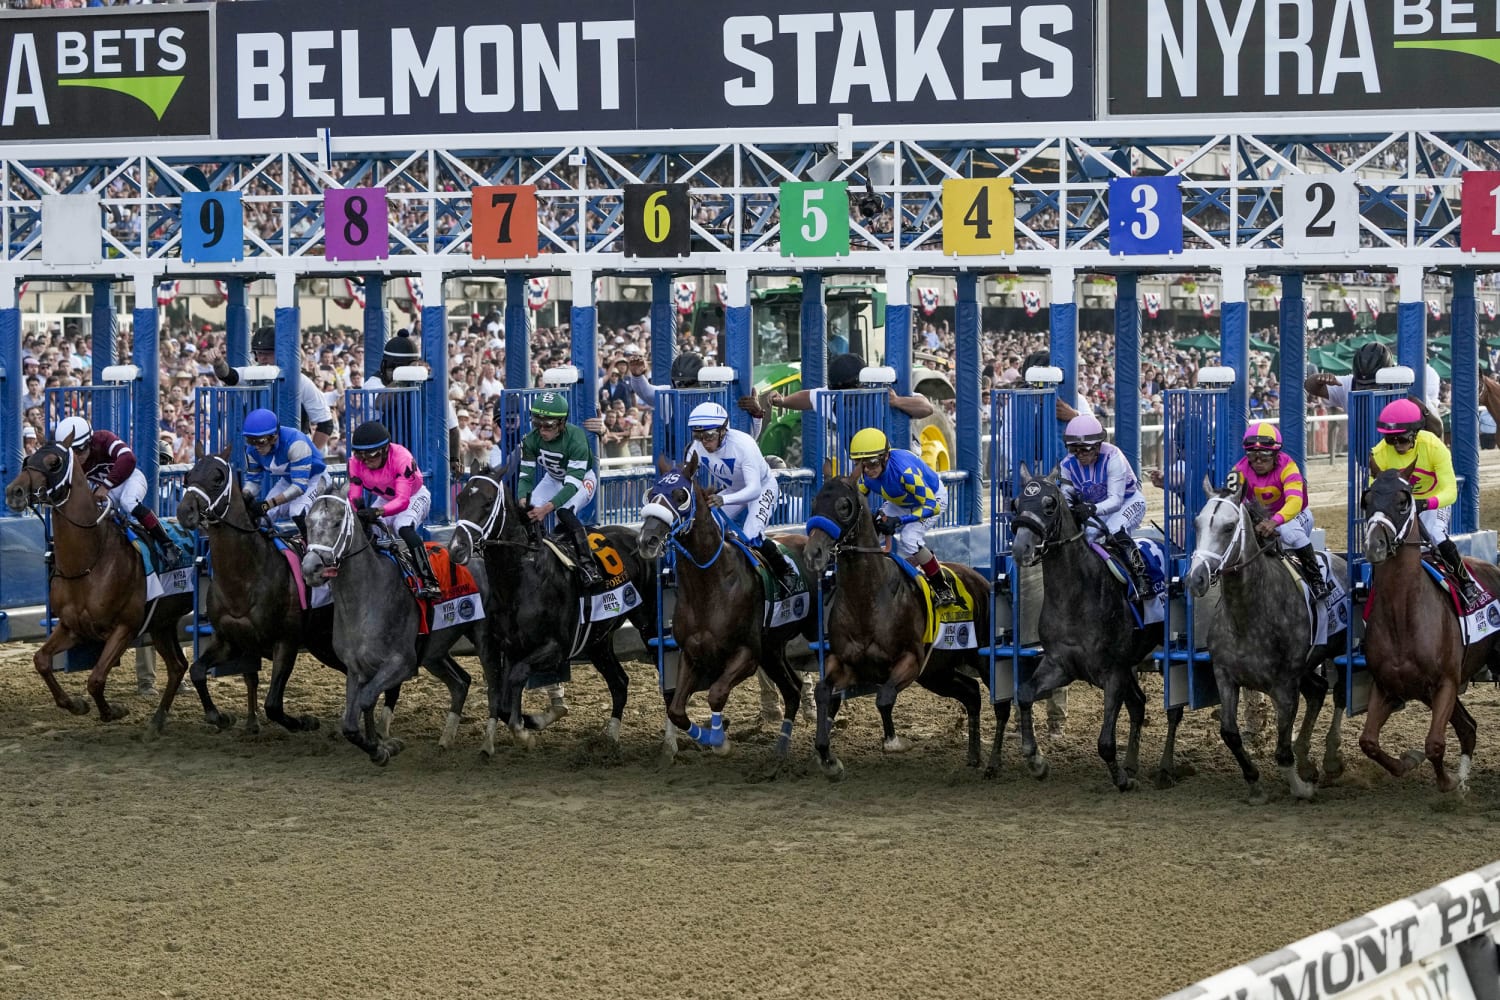 Horses die in consecutive races at Belmont Park after history-making event